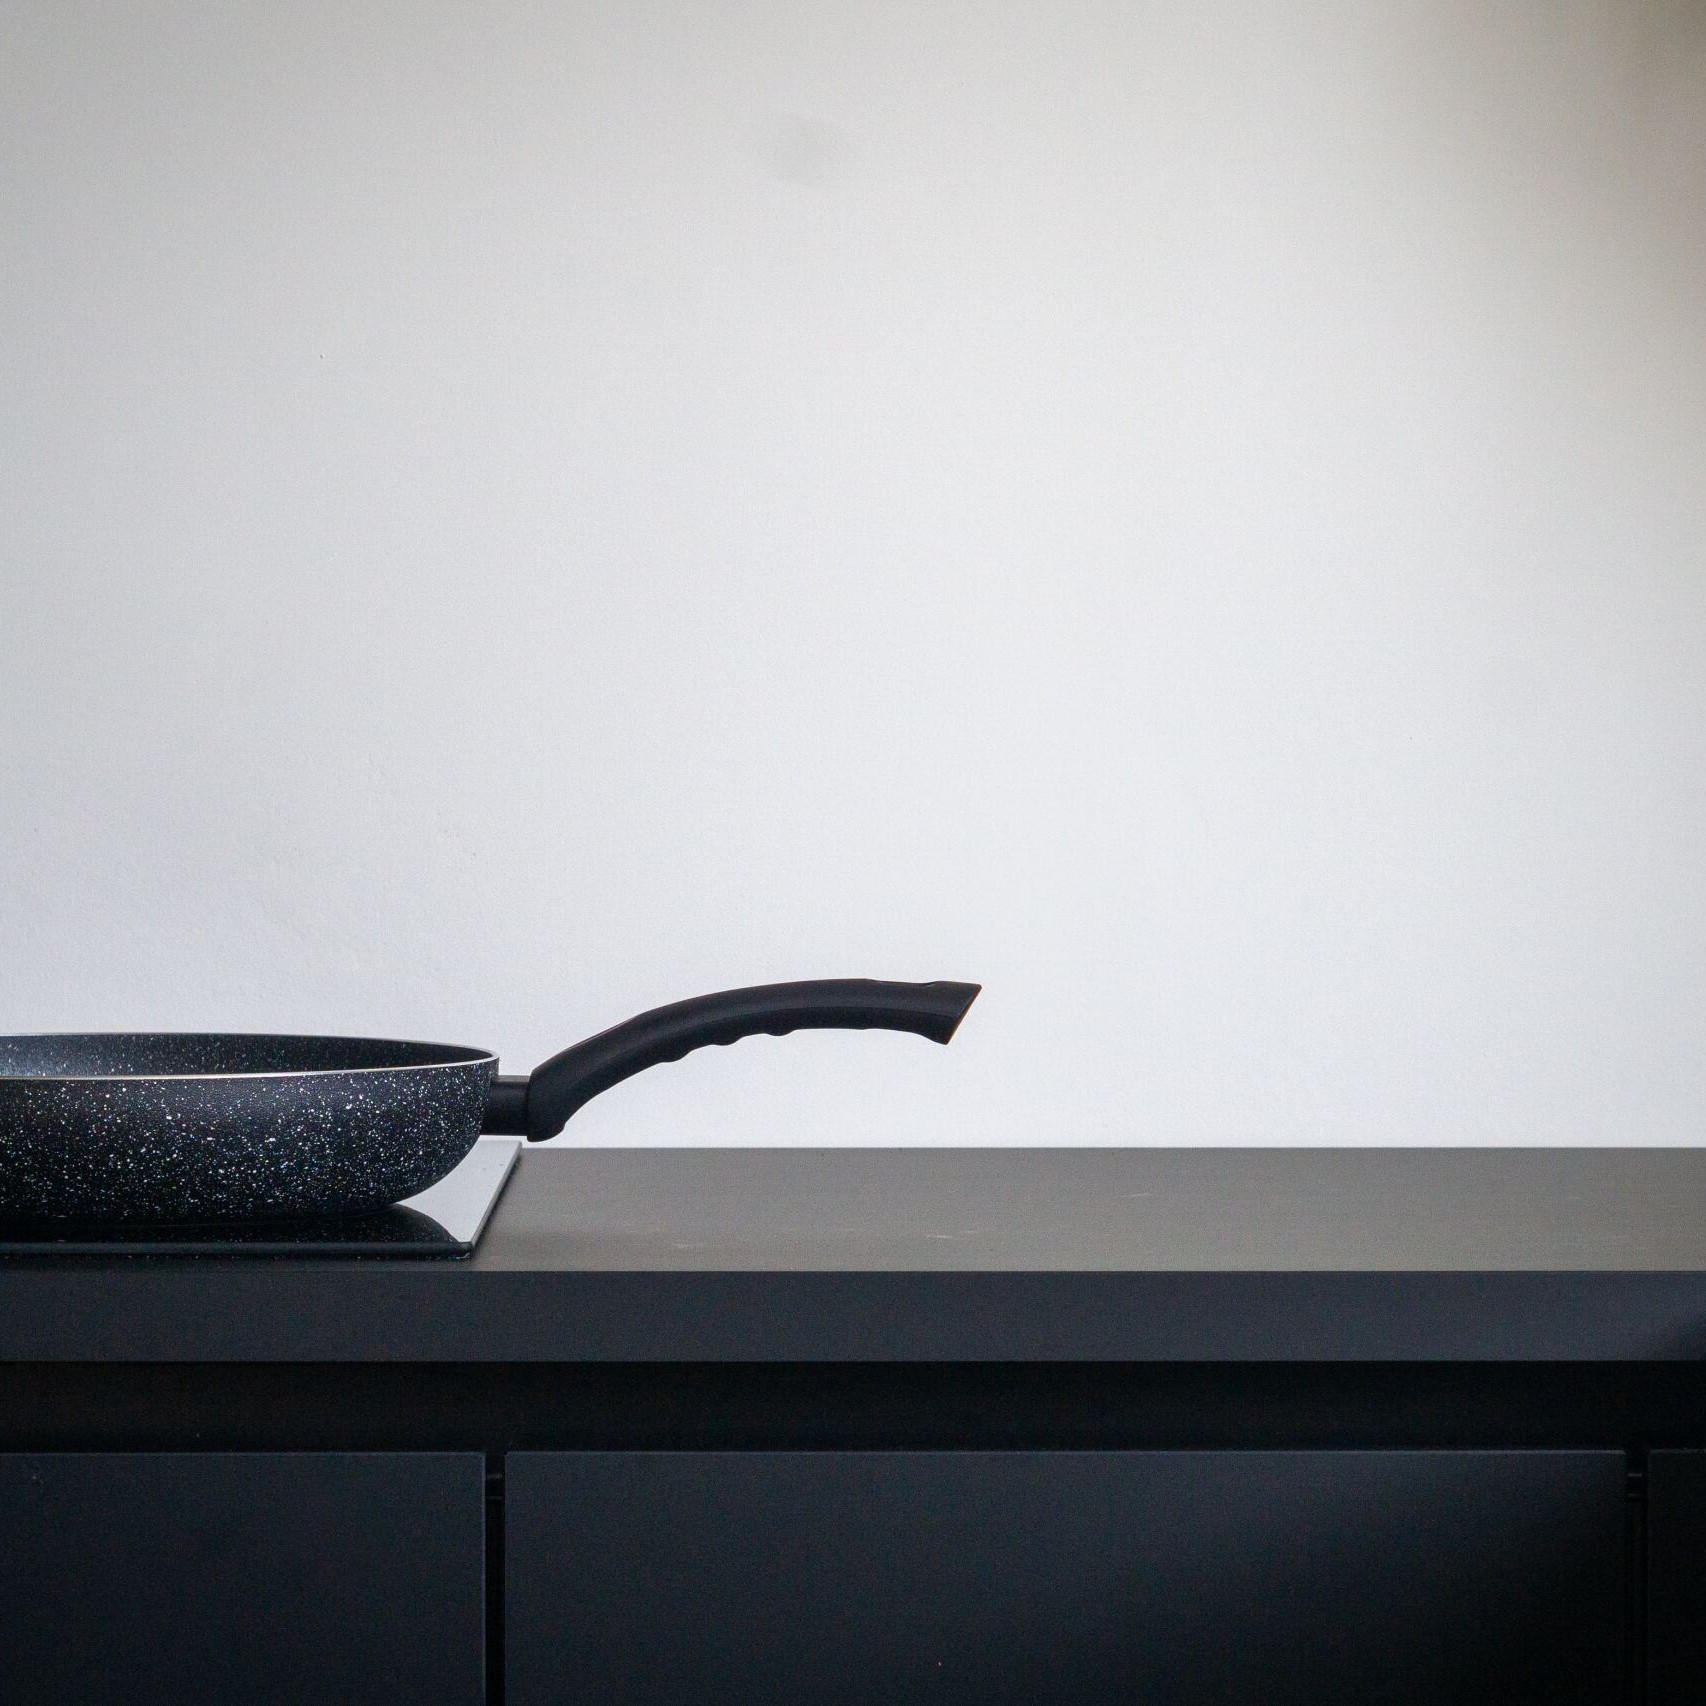 The image shows a black frying pan with a speckled pattern, placed on a black stovetop or countertop. The pan has a long, ergonomic handle. The background is a plain white wall, creating a minimalist and clean aesthetic. The scene is simple and uncluttered, focusing solely on the frying pan, which appears to be new and unused. The overall atmosphere is modern and sleek, with a strong emphasis on the contrasting colors of black and white.